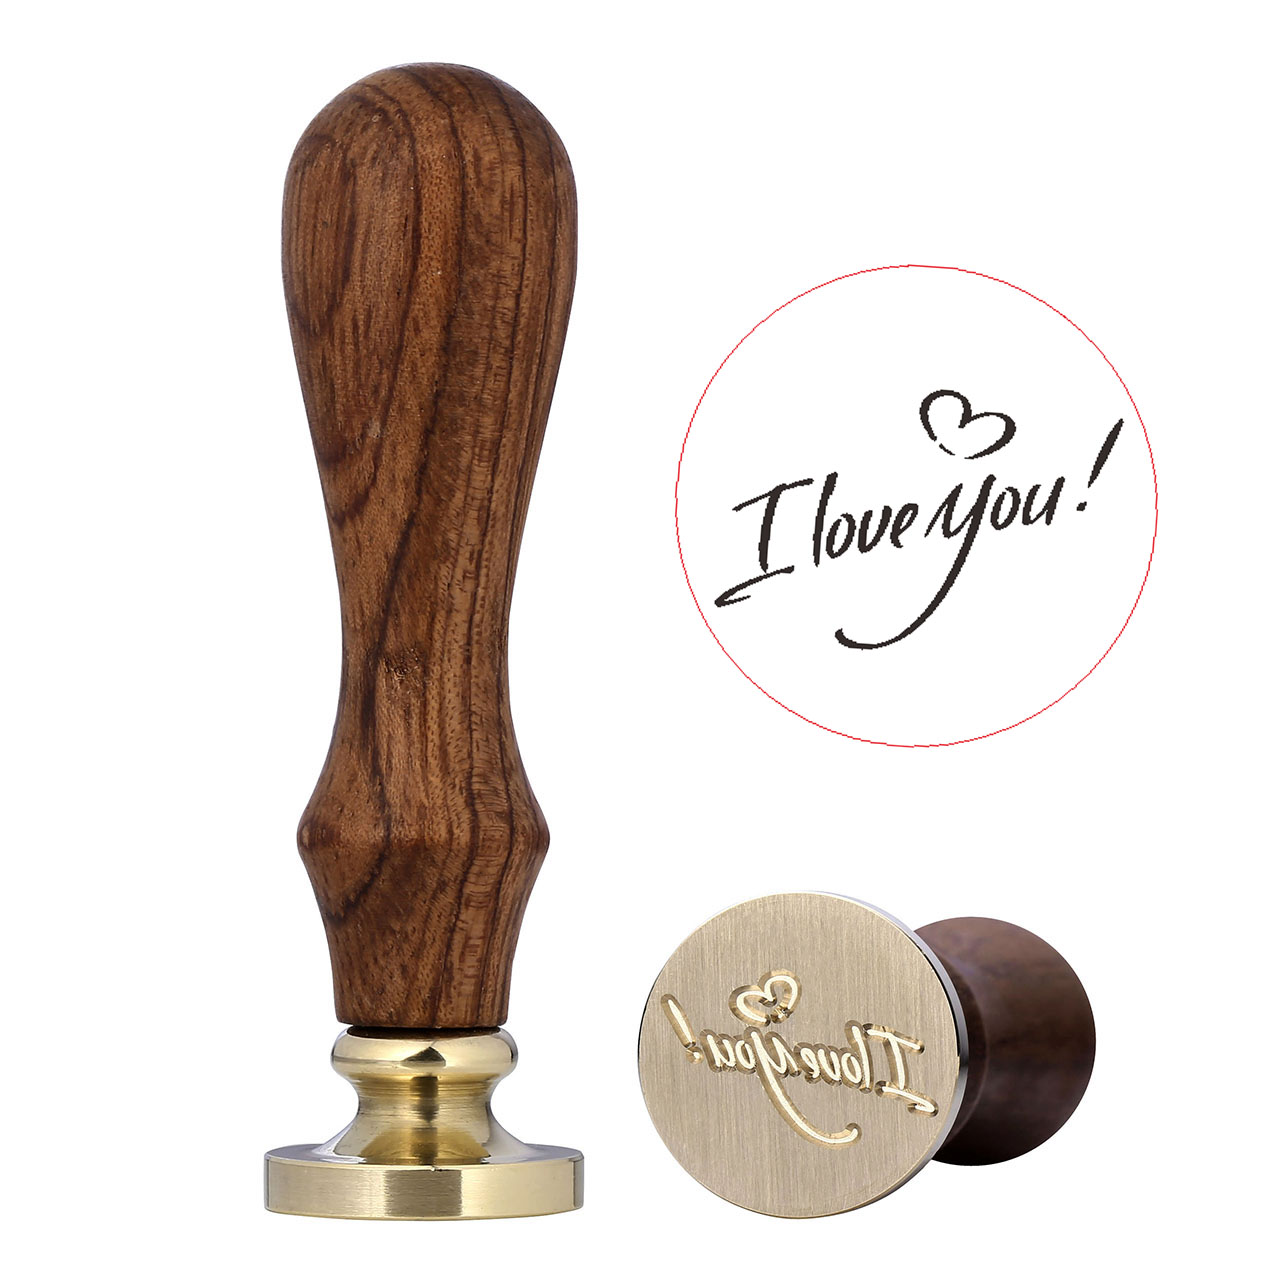 I Love You Wax Seal Stamp,Yoption Vintage Retro Brass Head Wooden Handle I Love You Sealing Wax Seal Stamp,Great for Embellishment of Cards Envelopes,Invitations,Wine Packages,Ideal Gift (I Love You) 